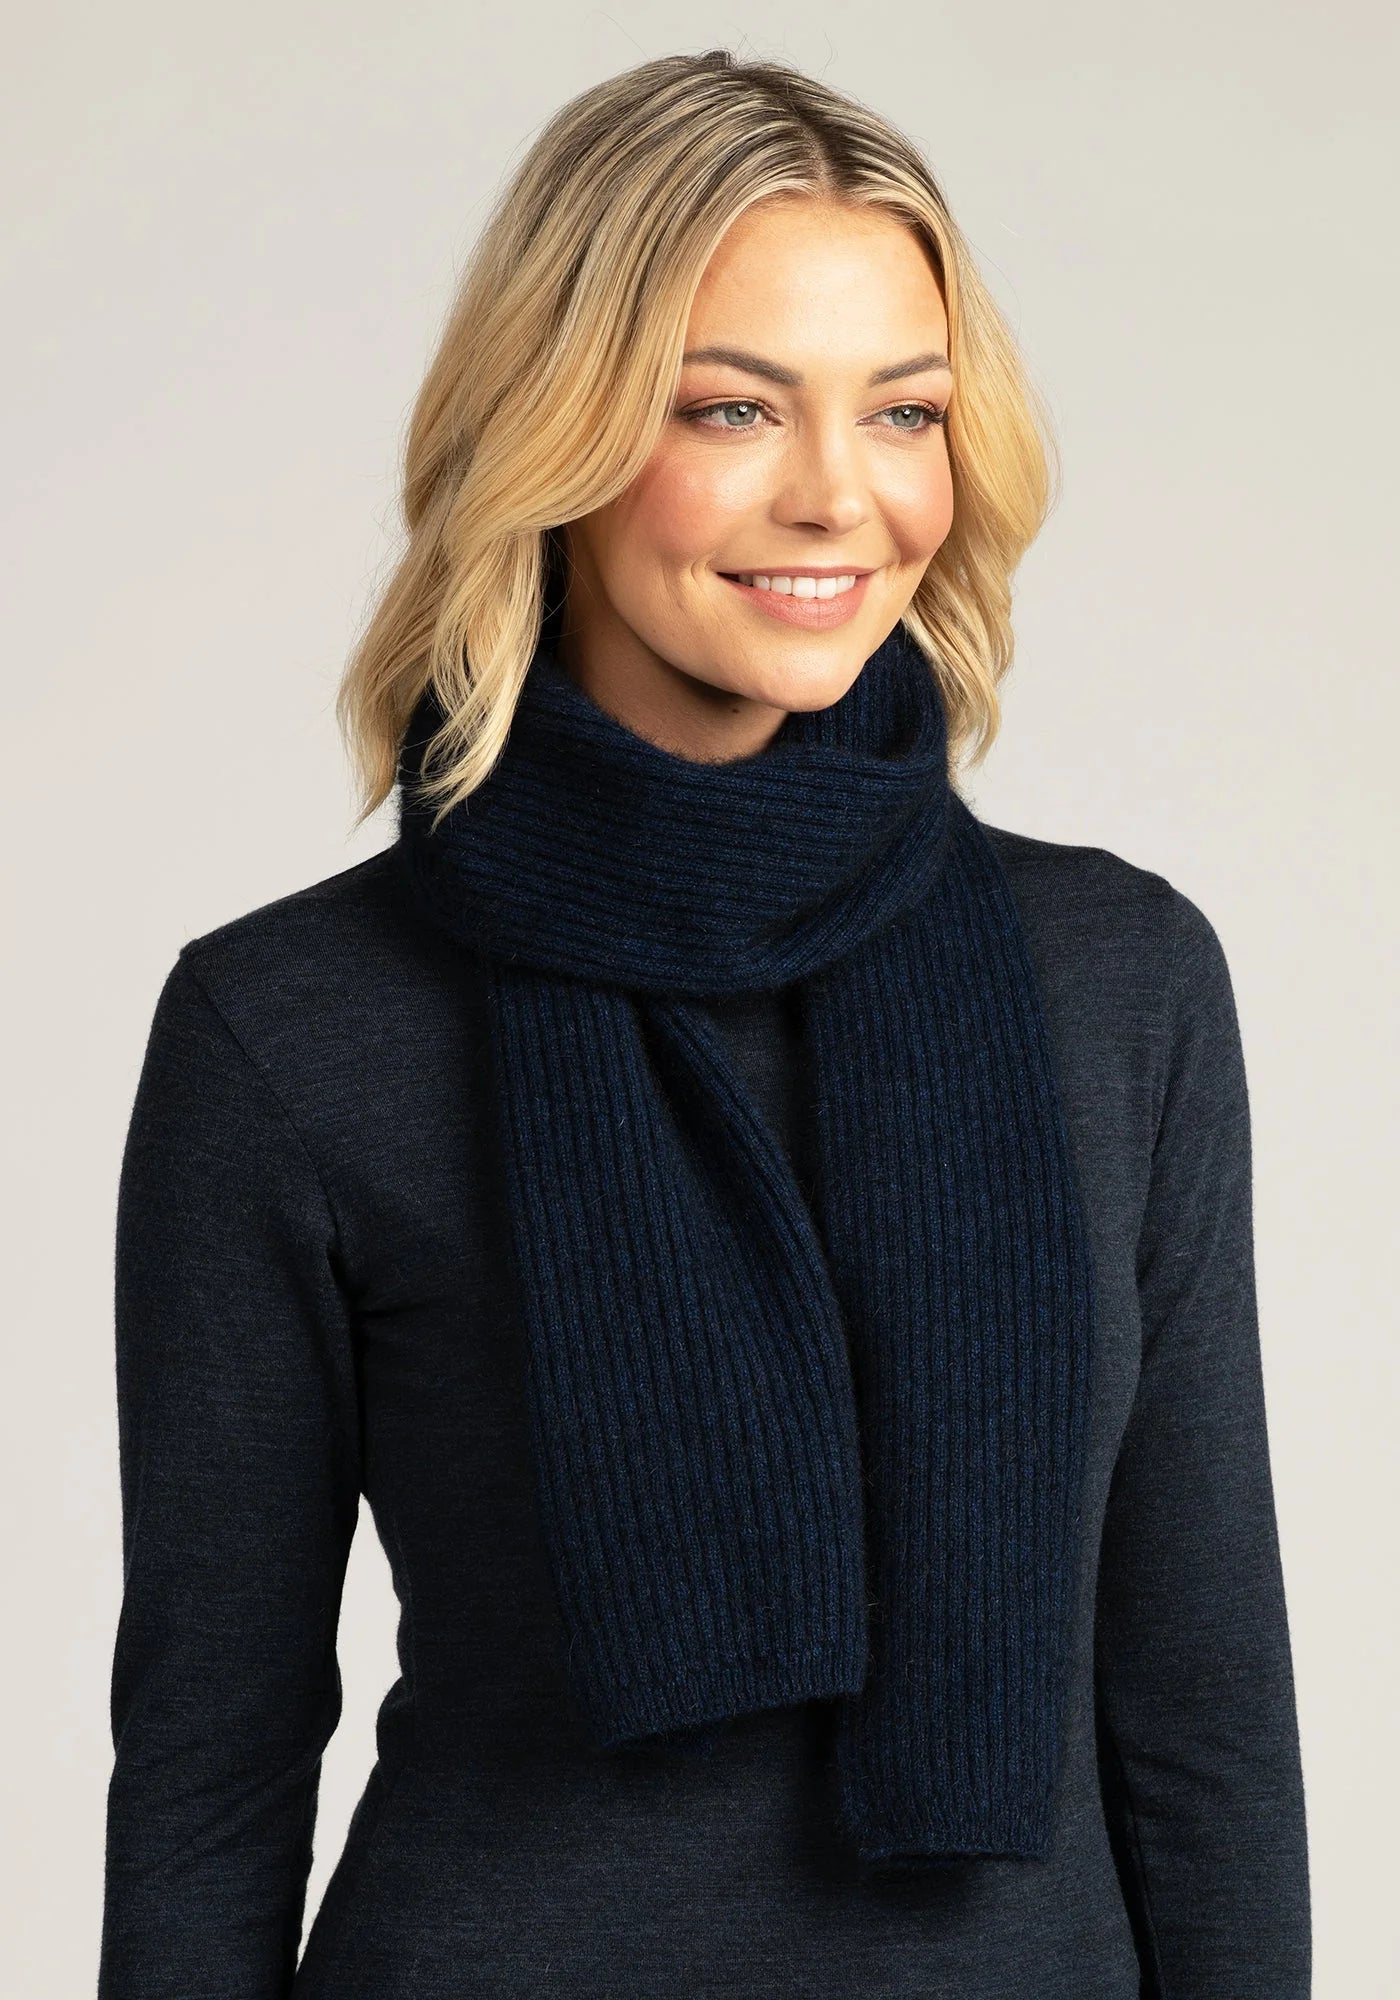 Bundle up in sophistication with our blue merino wool ribbed scarf. Luxuriously soft and endlessly versatile. Shop today!